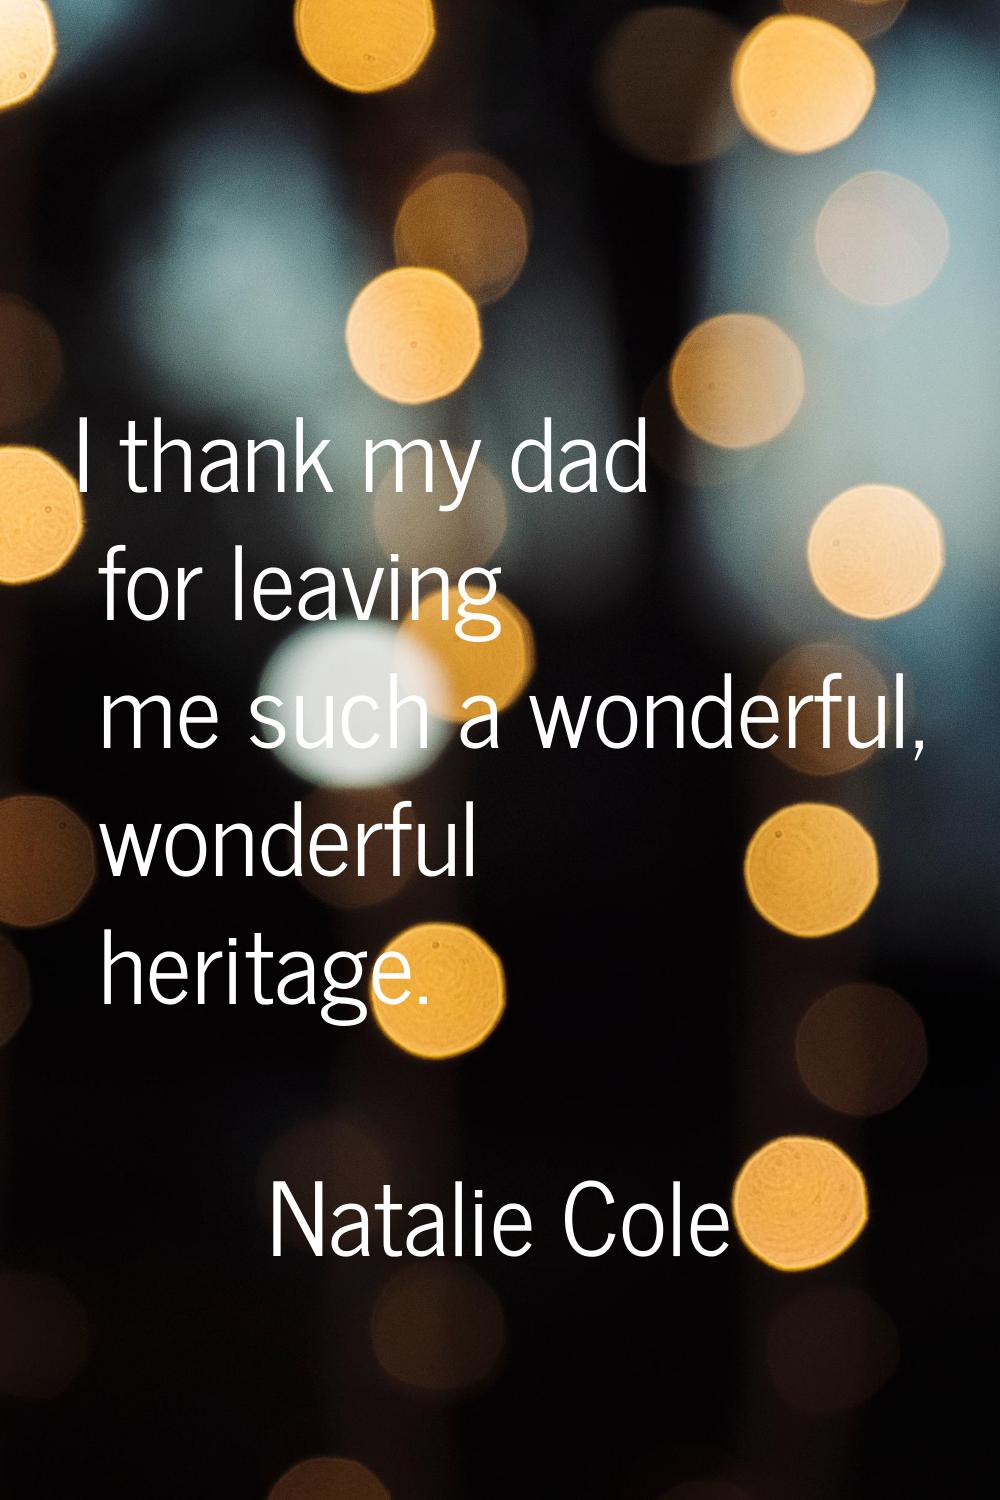 I thank my dad for leaving me such a wonderful, wonderful heritage.